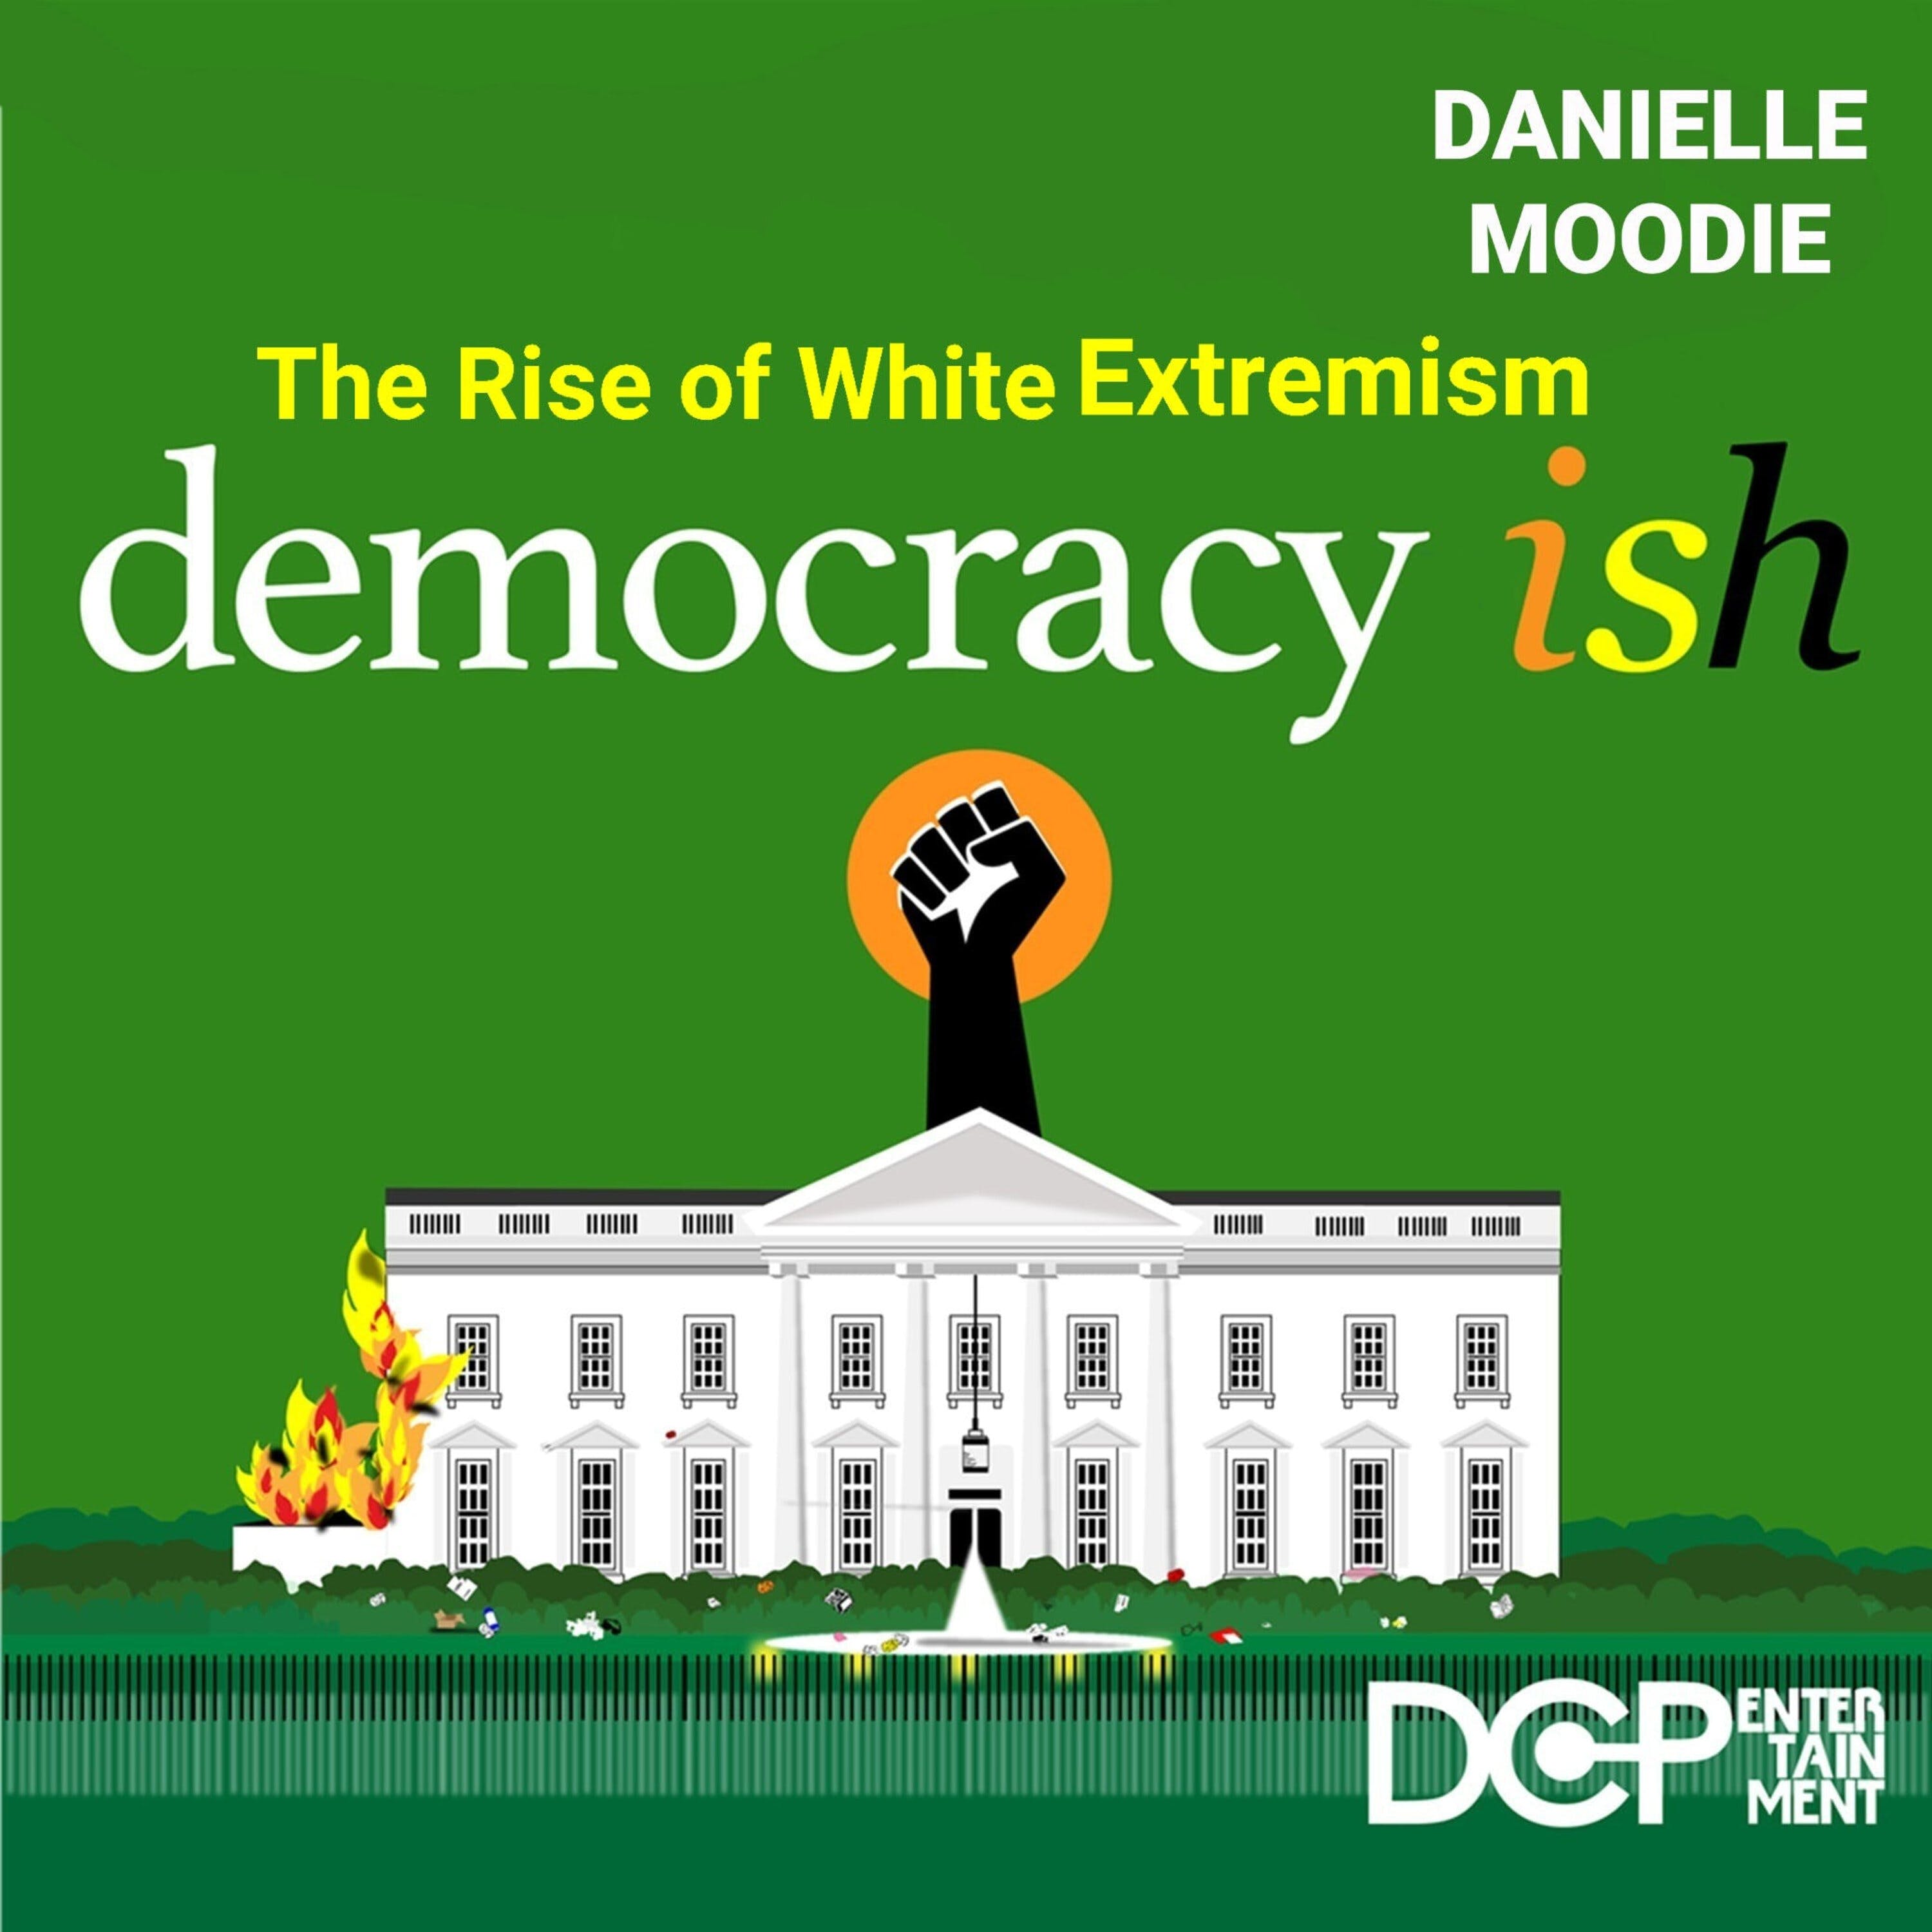 The Rise of White Extremism